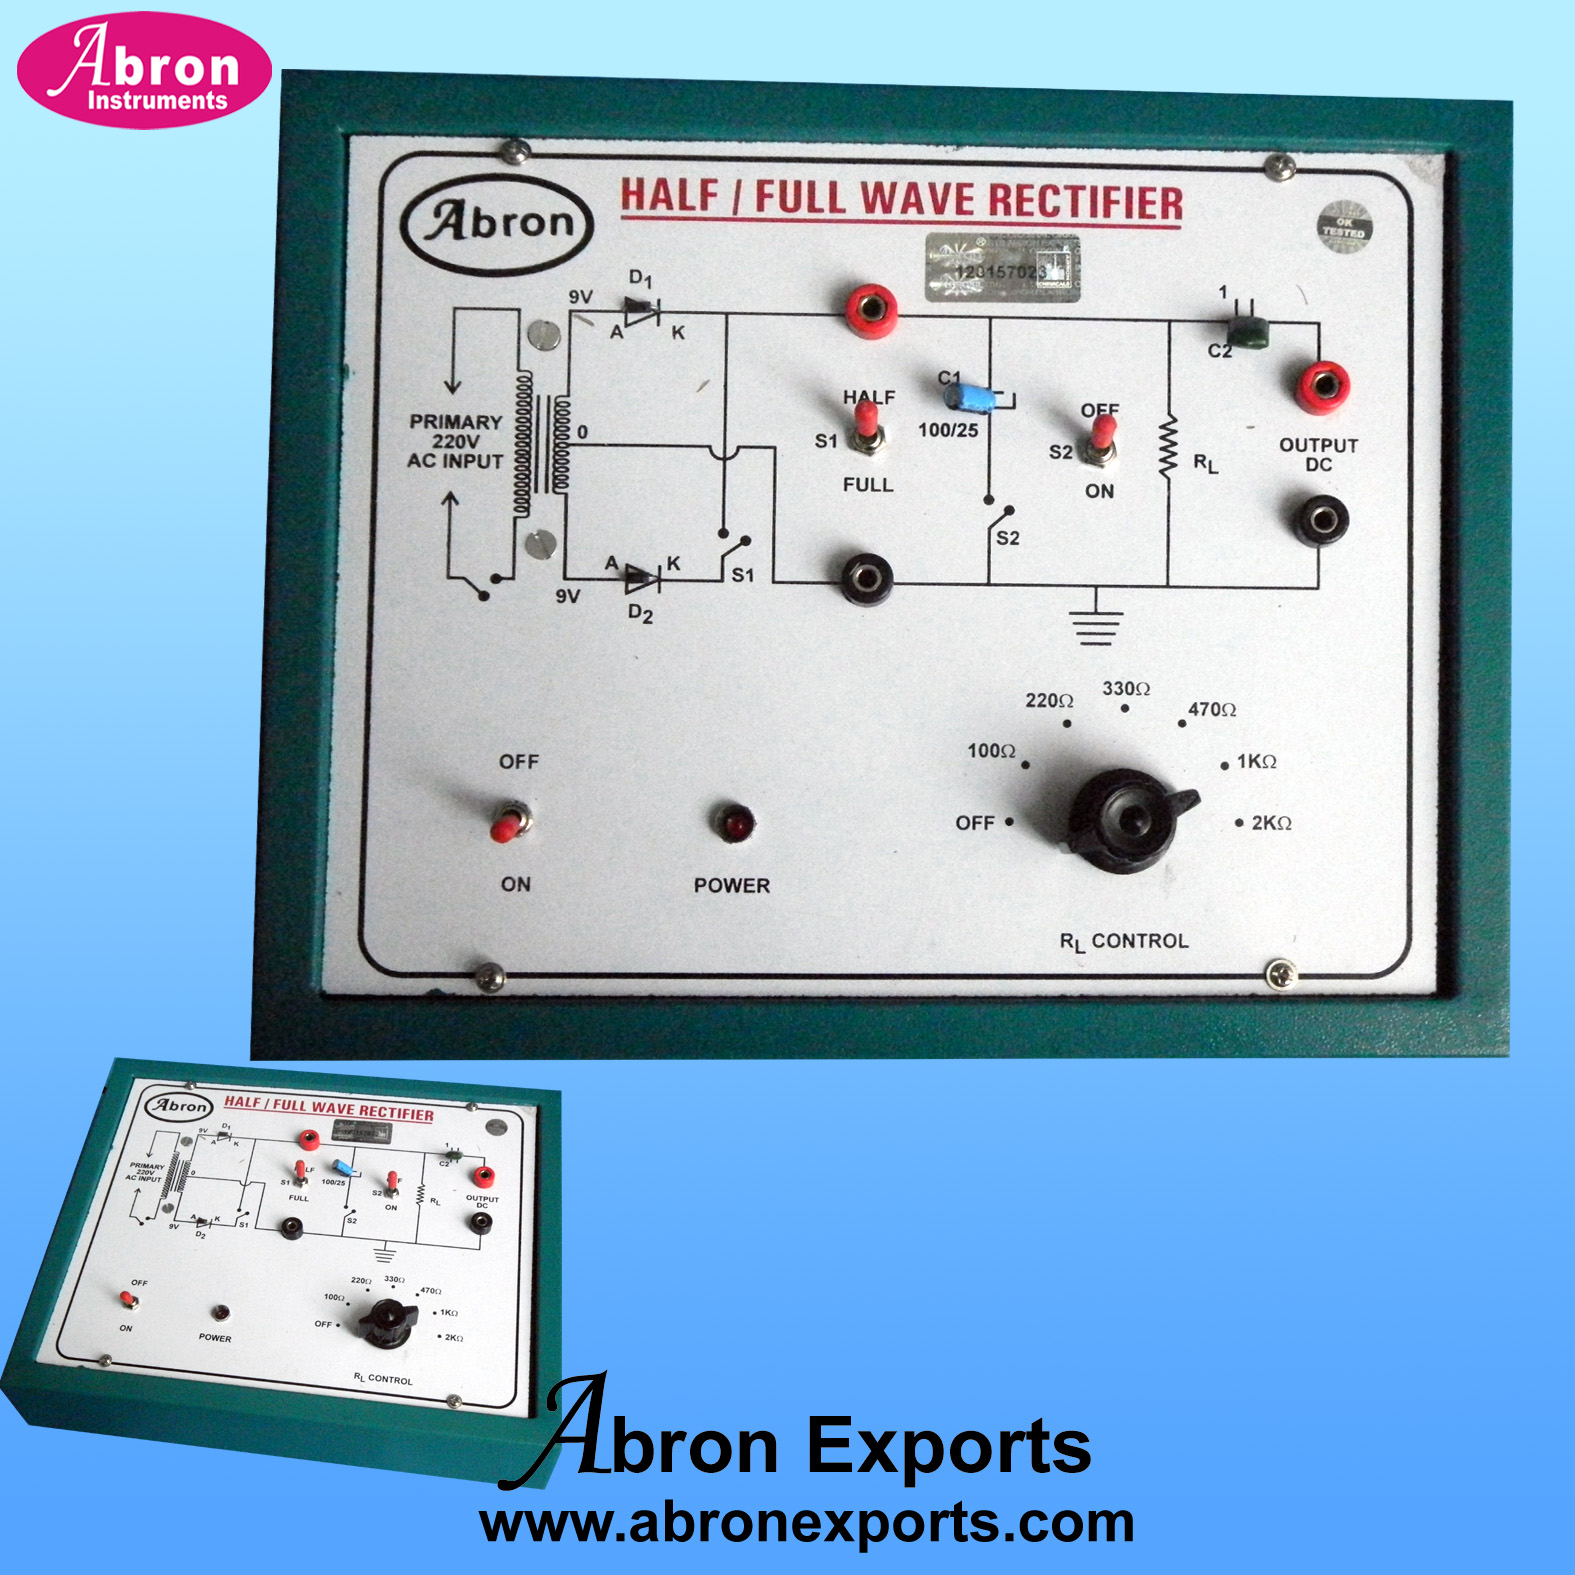 Diode as Half Wave Full Wave Rectifier Trainer Kit Setup With Sockets Out to CRO power supply	Abron AE-1251A                     